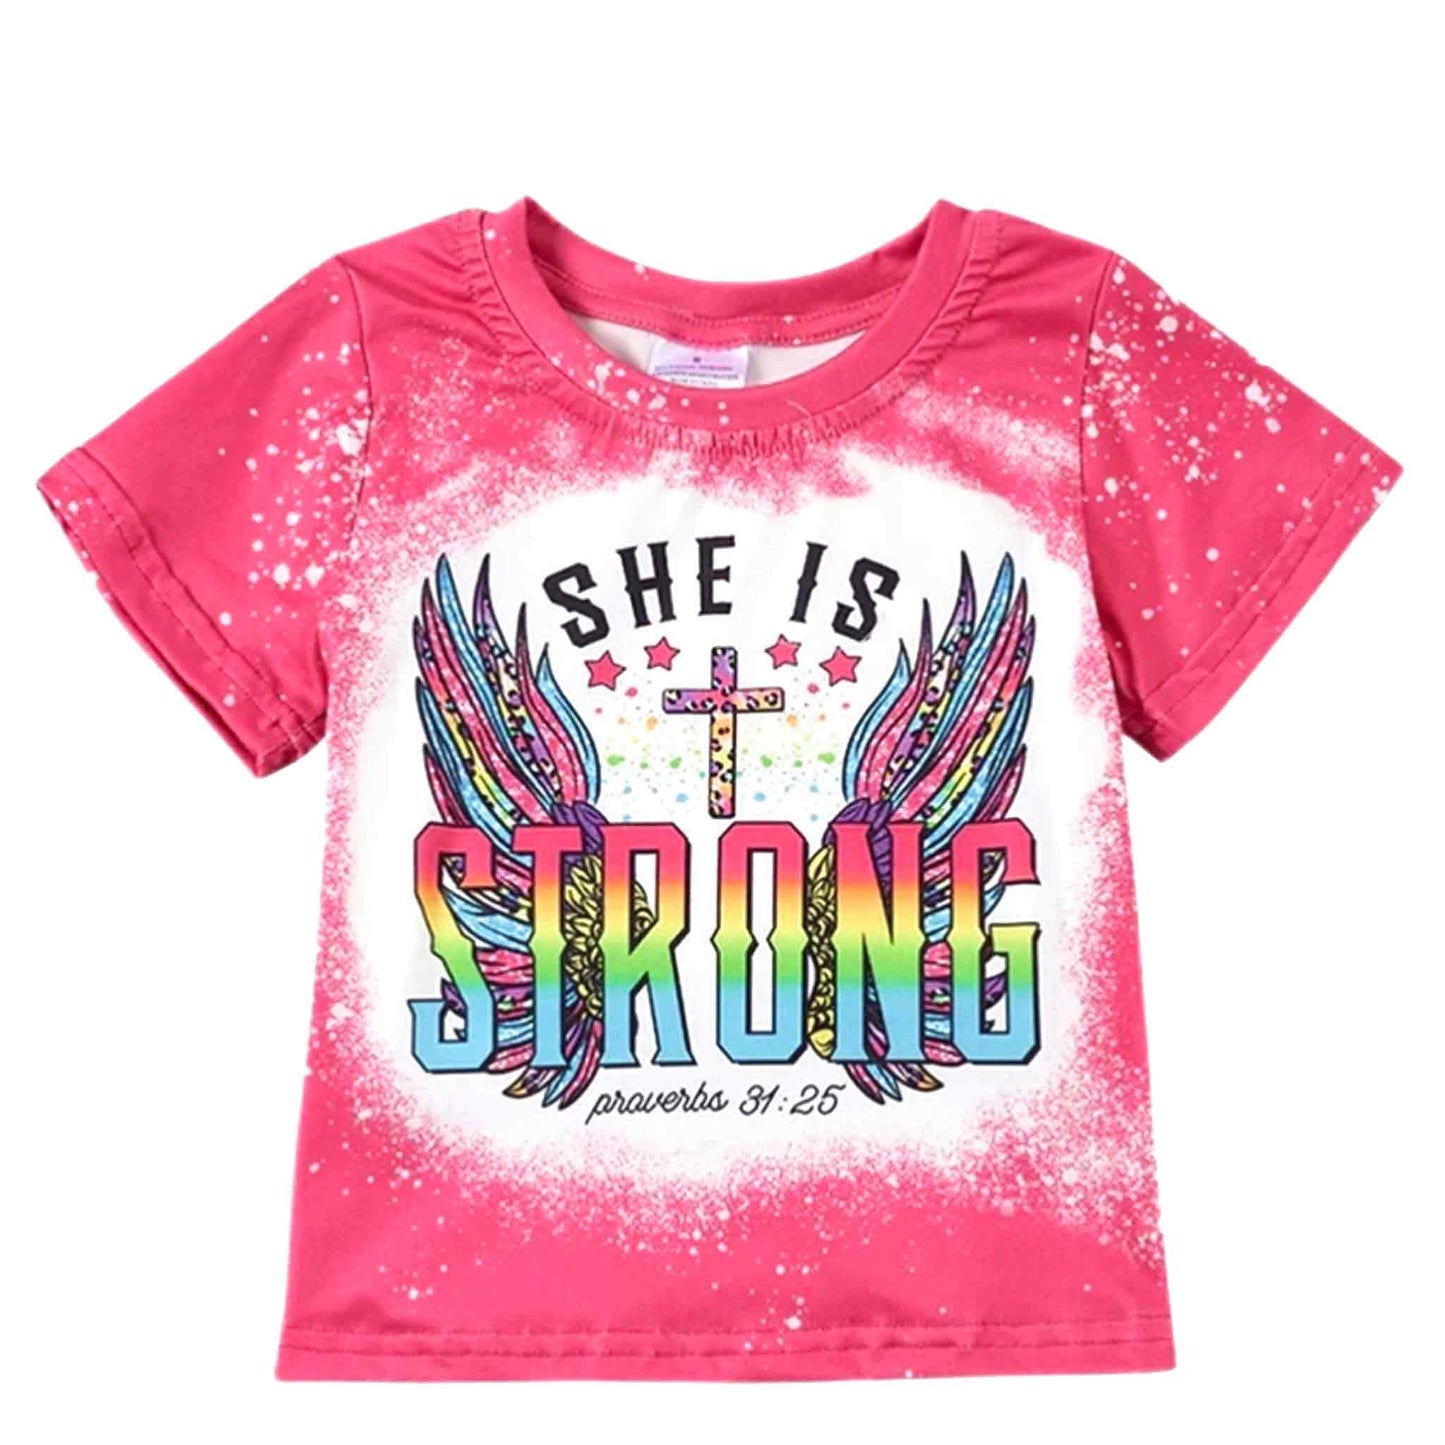 She is Strong Shirt